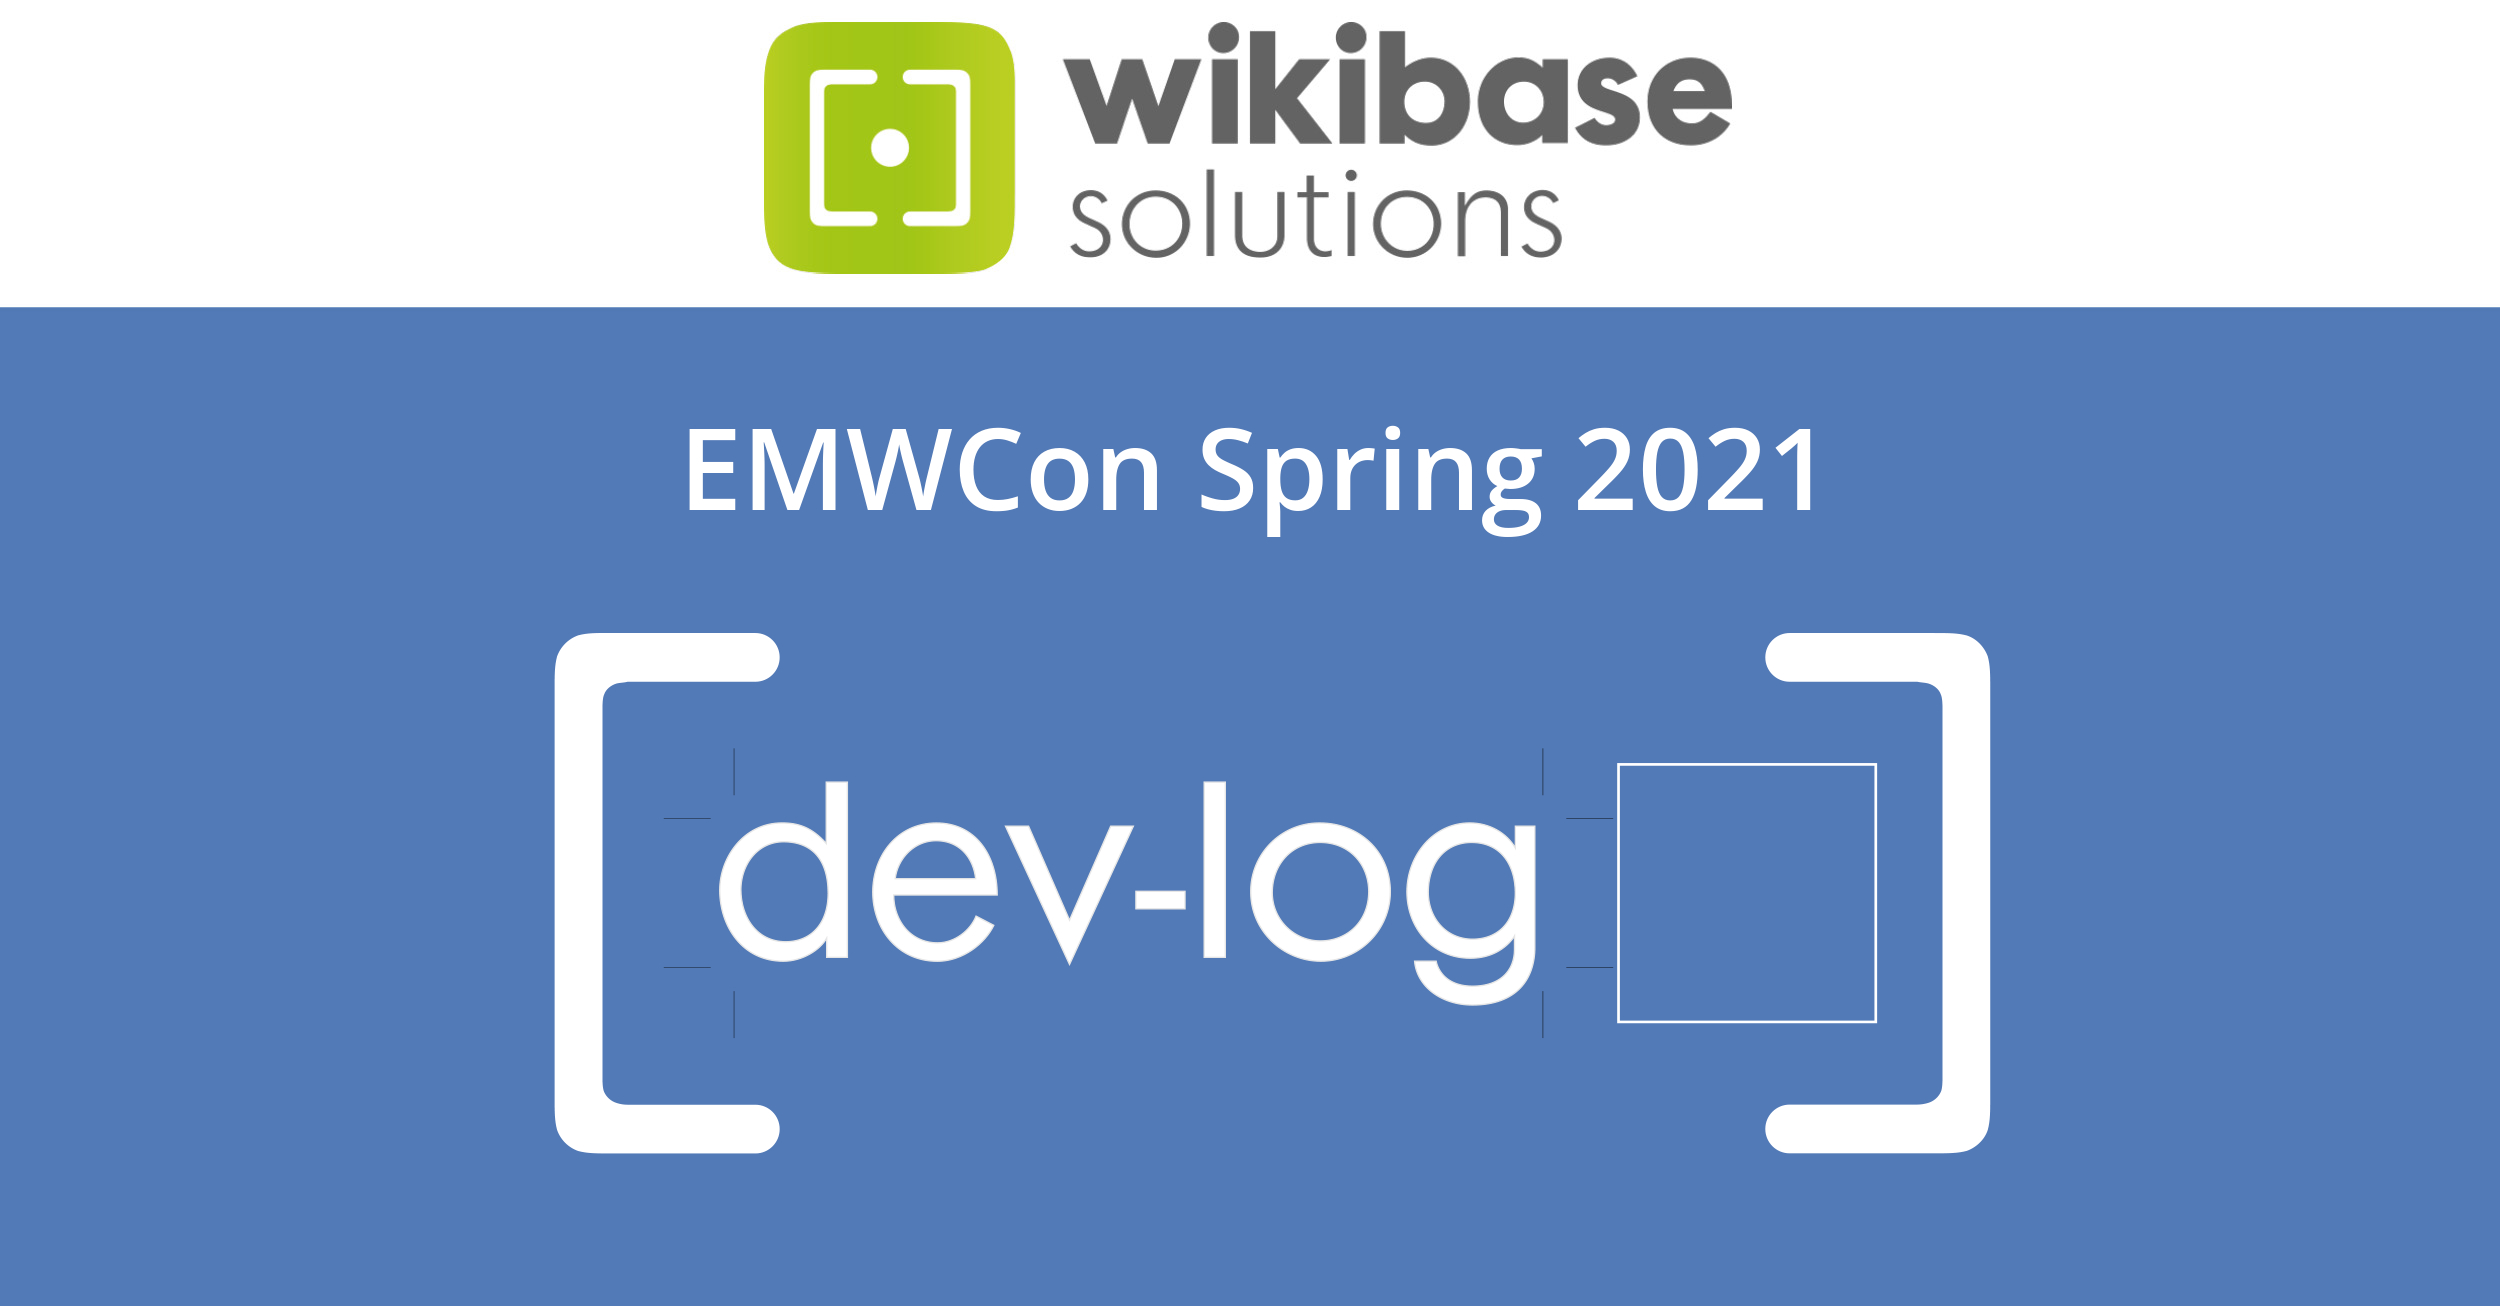 Wikibase-Solutions EMWCon-Spring-2021.jpg